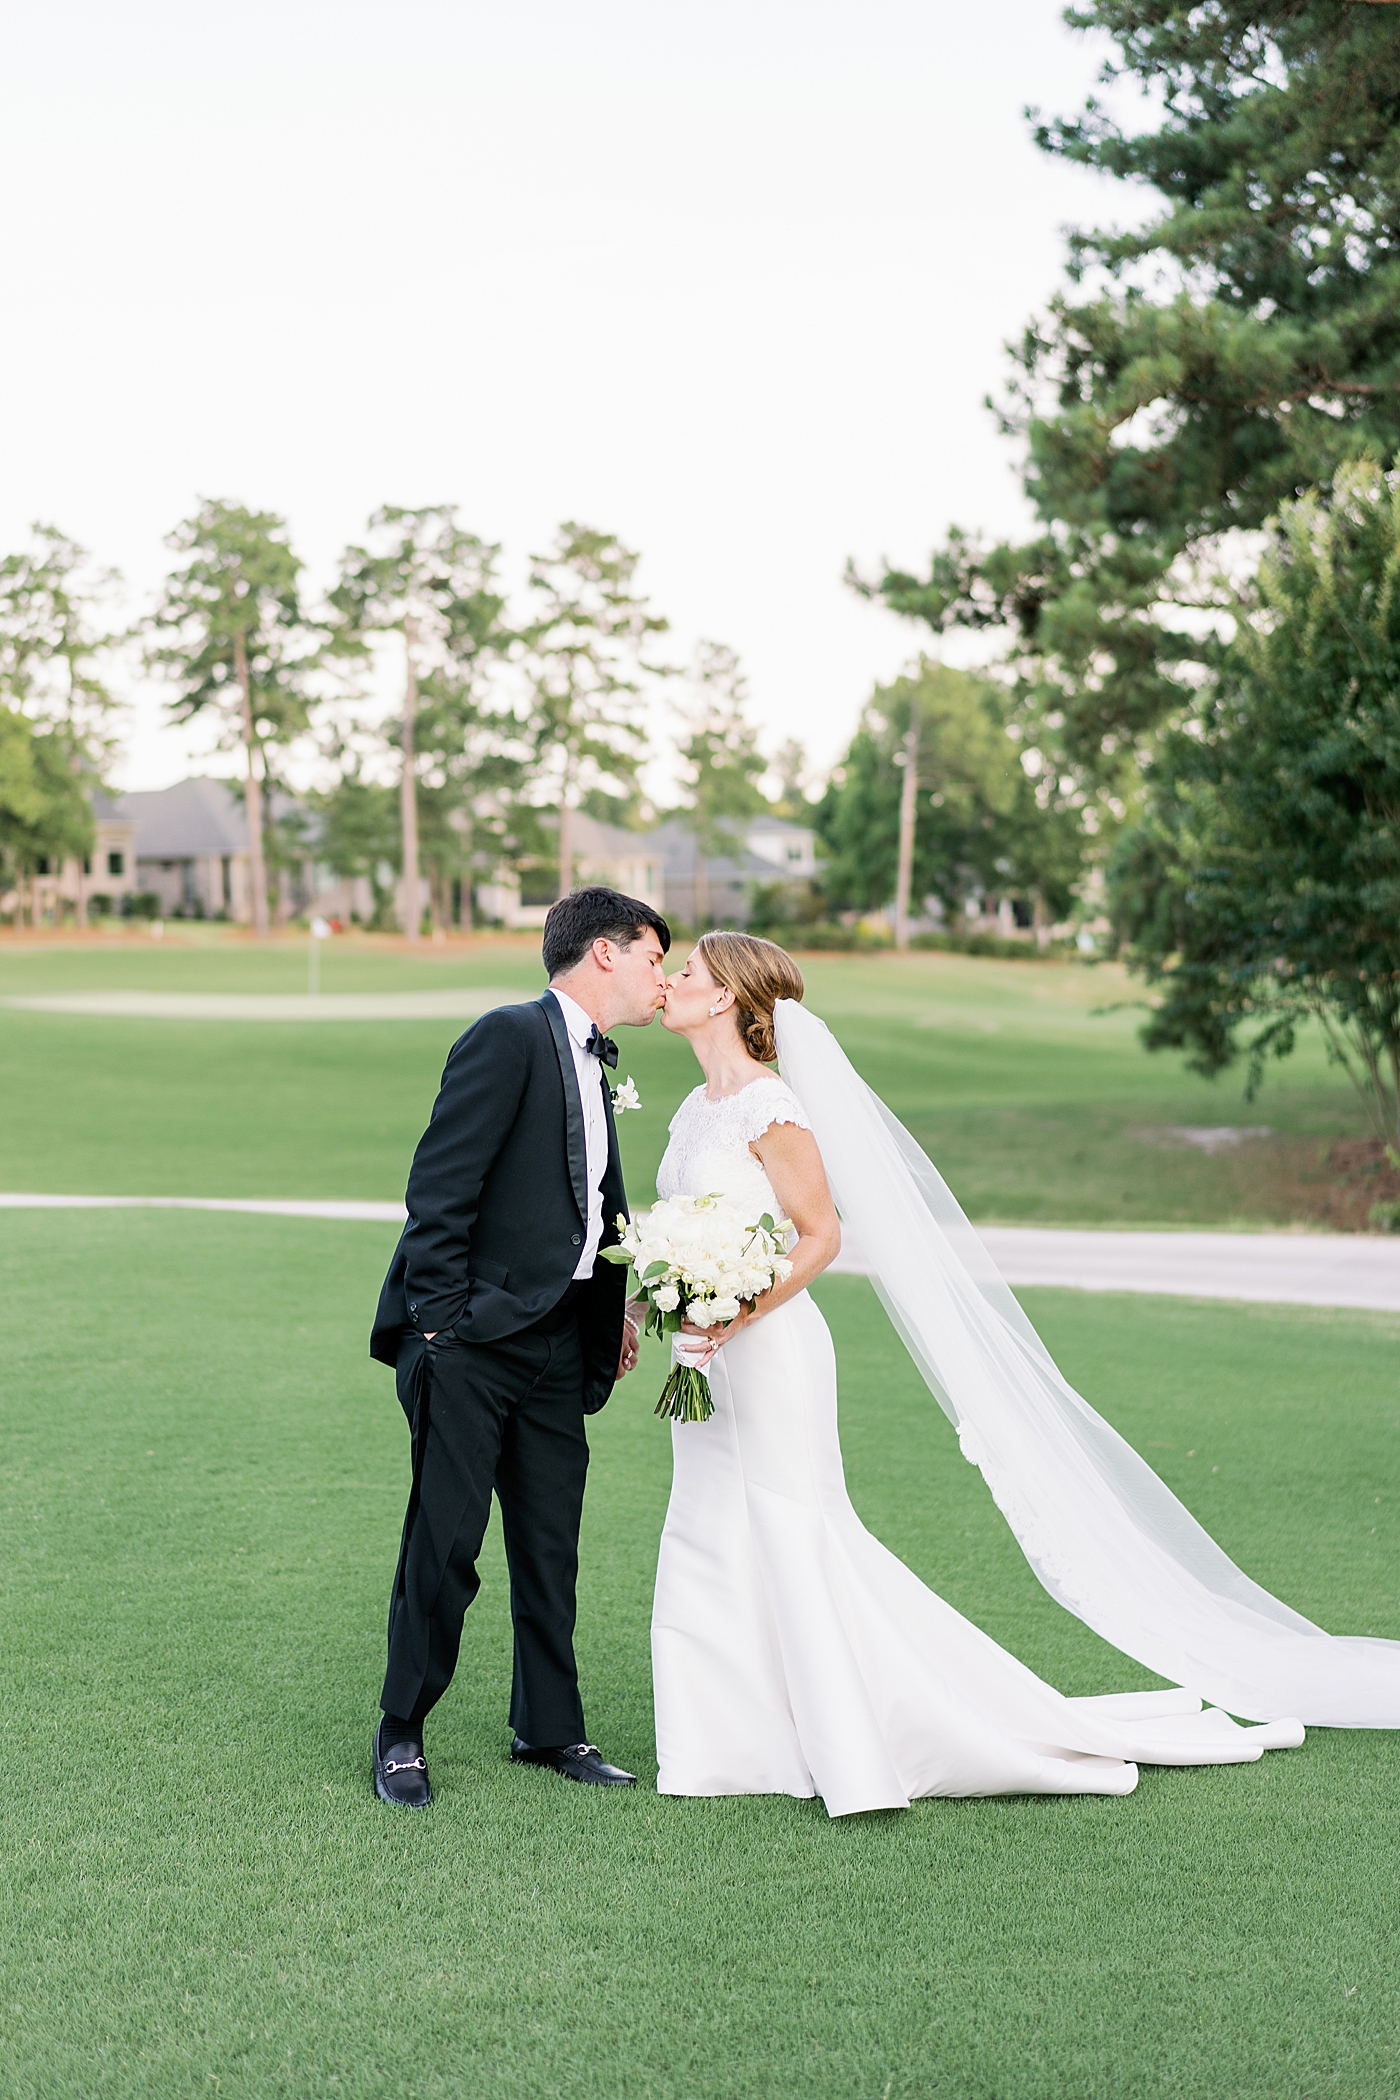 Bride and groom at their sunset portraits at their Simple Southern Country Club Wedding | Image by Annie Laura Photo